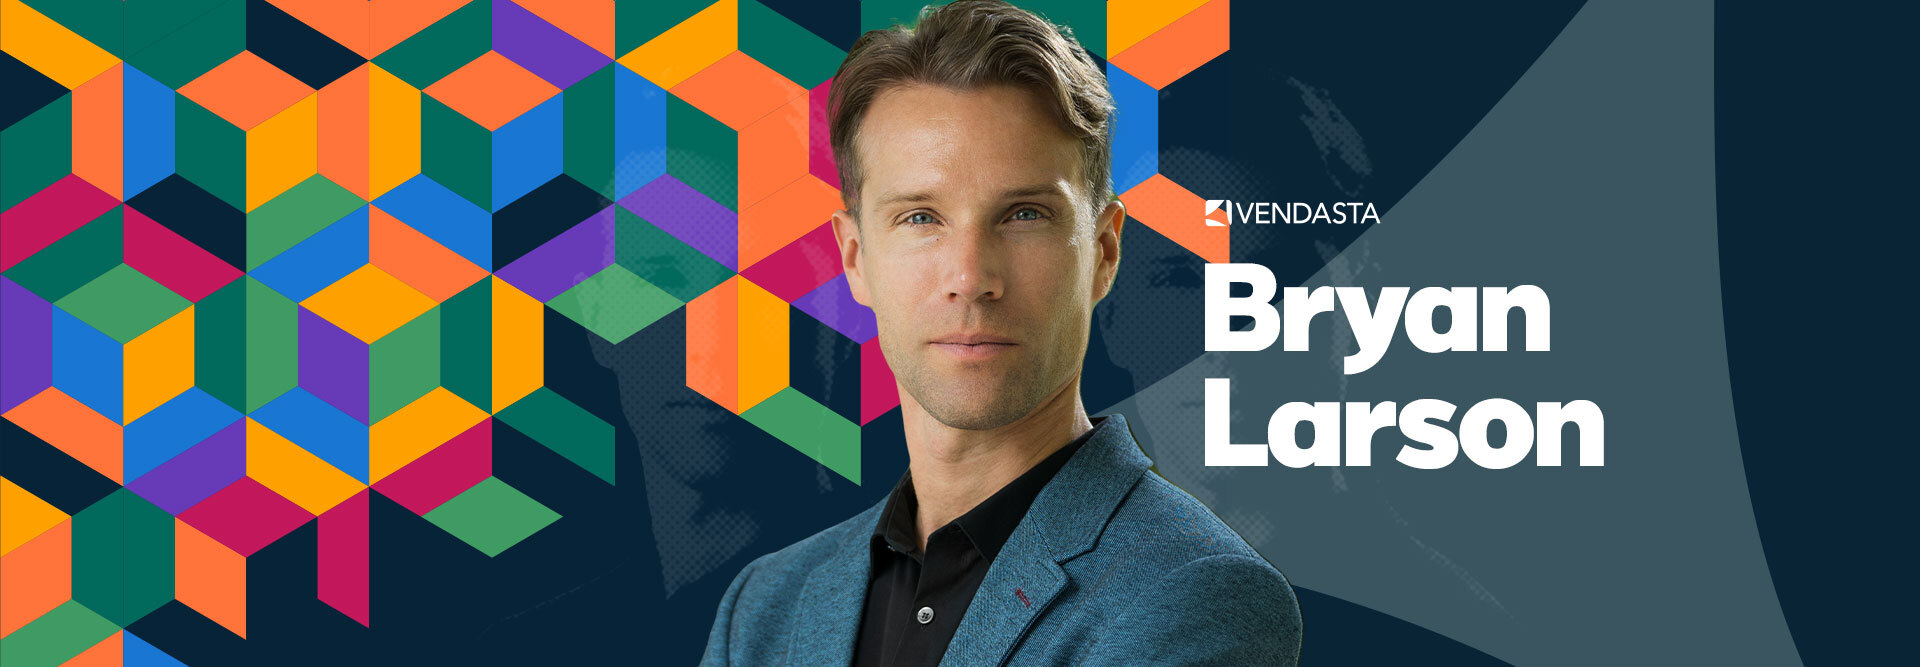 Design expert and Vendasta Vice President of Strategy Bryan Larson talks about team empowerment and strategic autonomy in R&D teams.